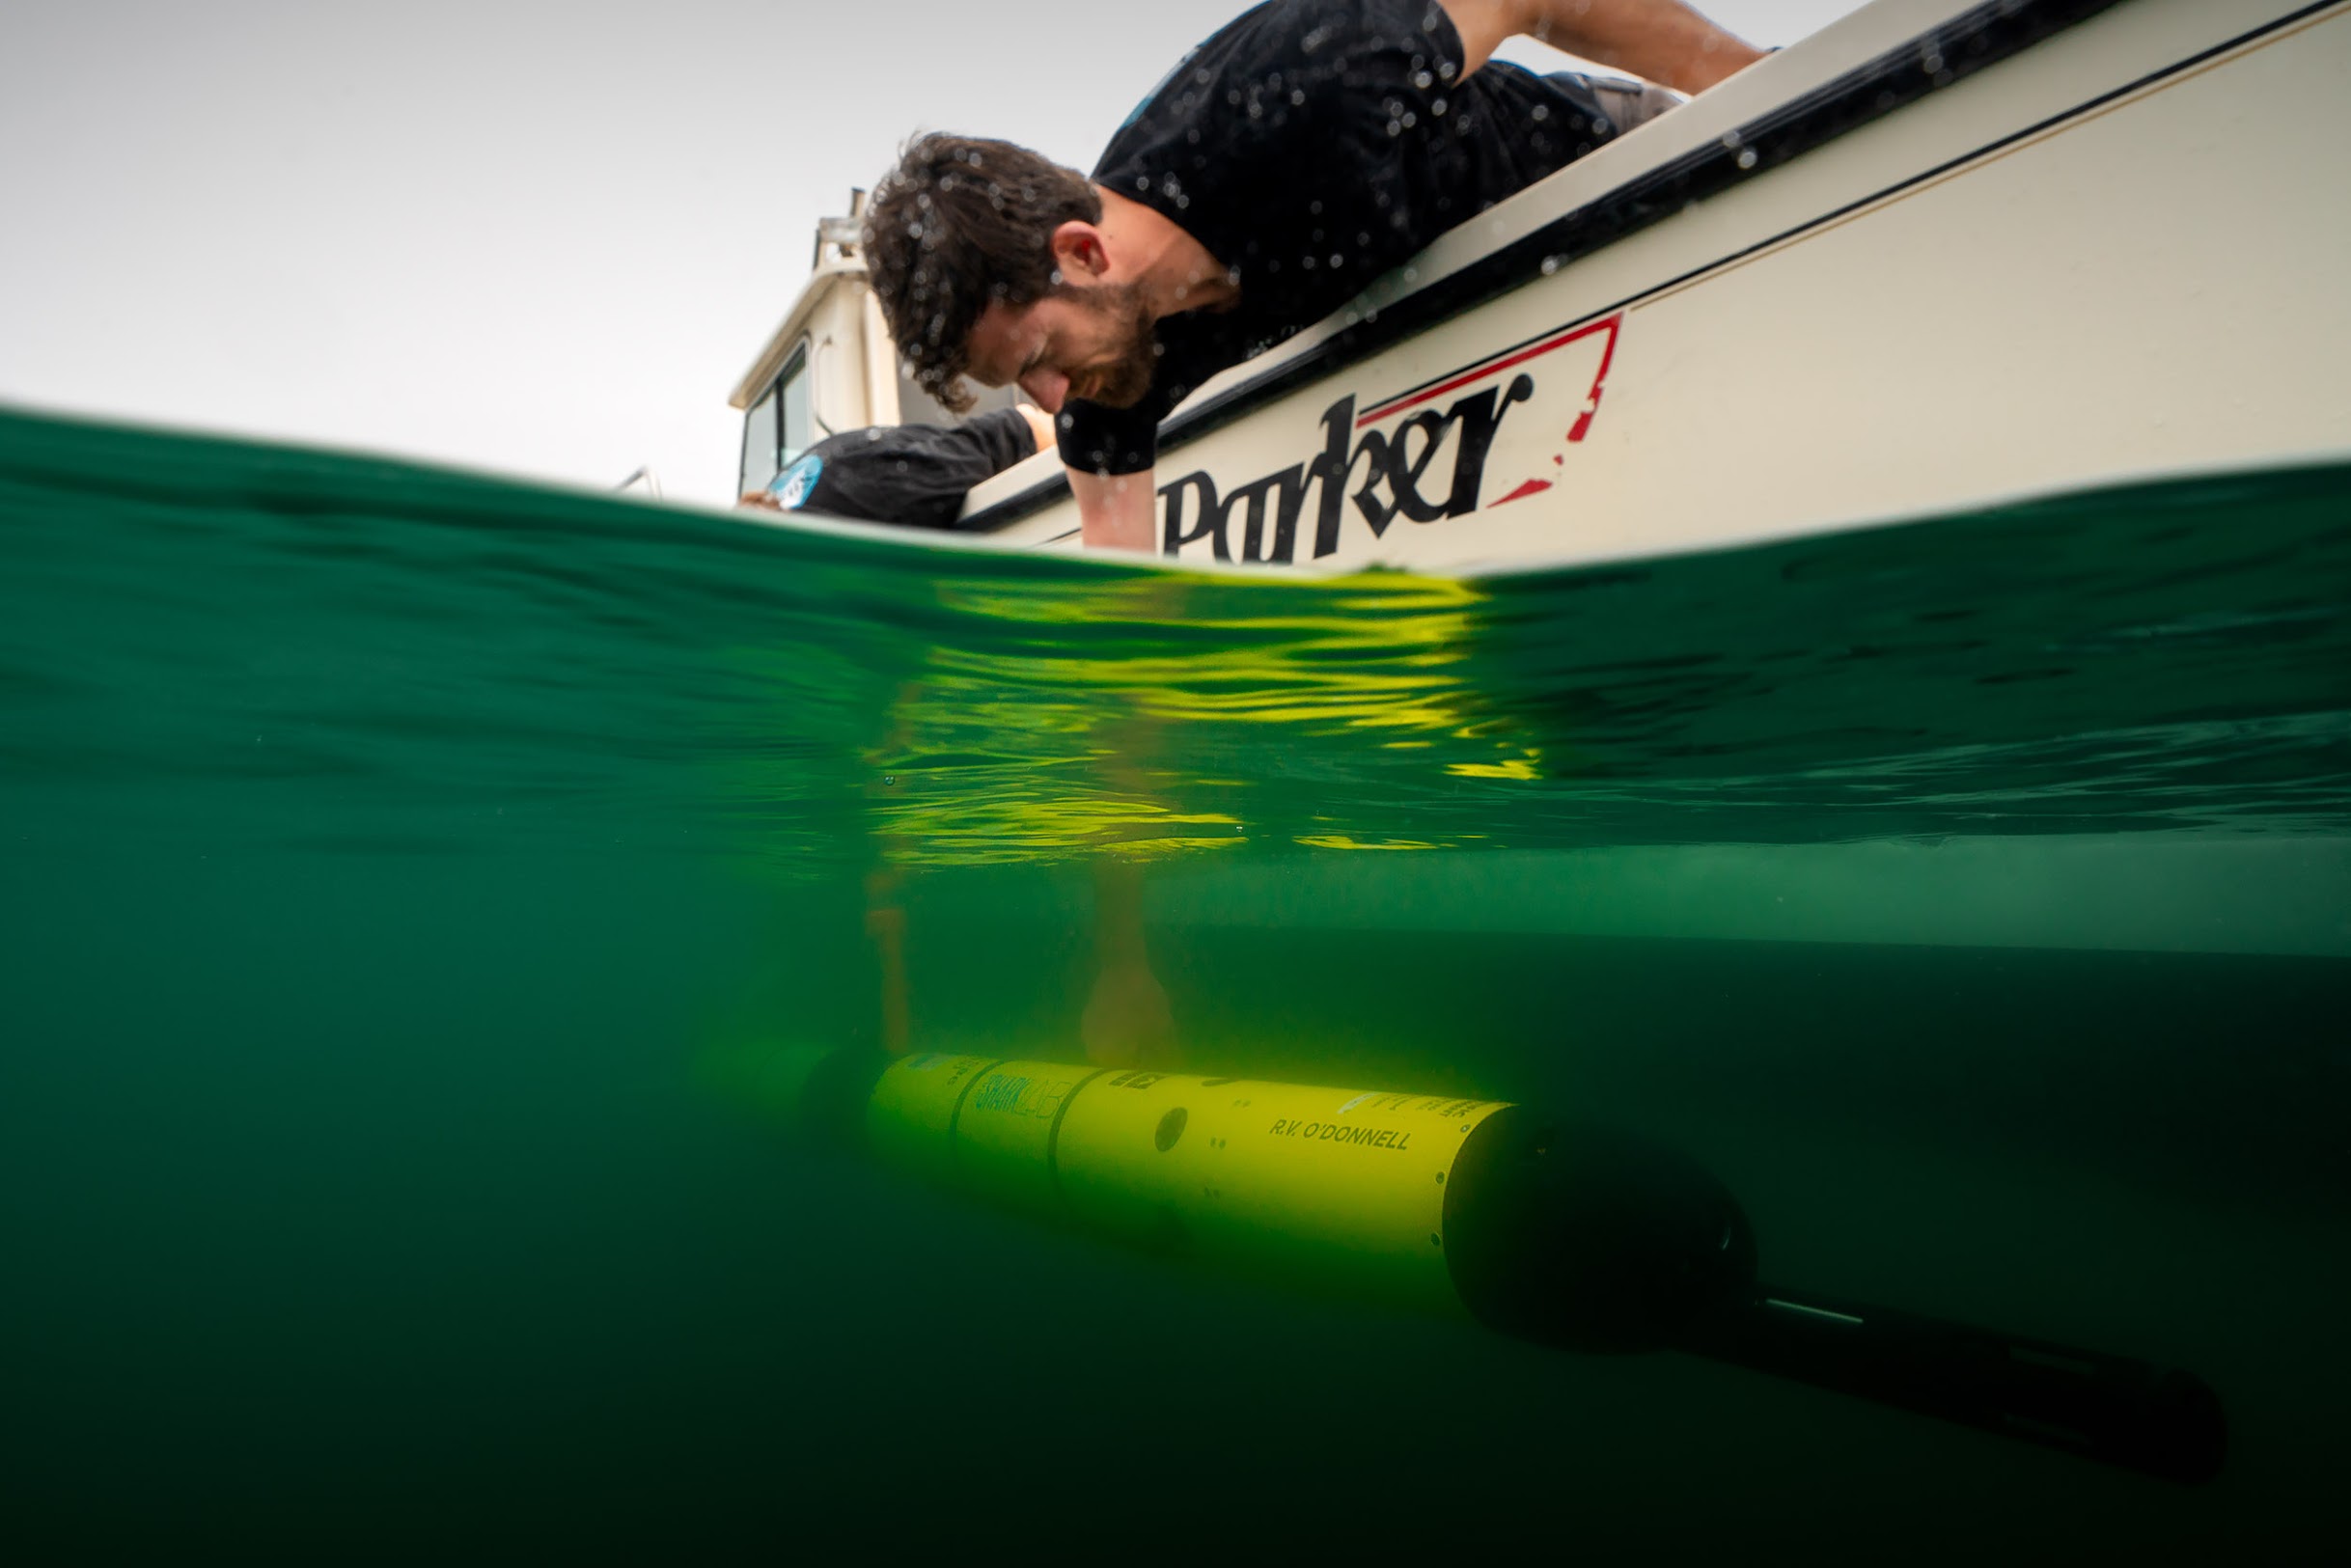 researcher deploying an AUV in the water